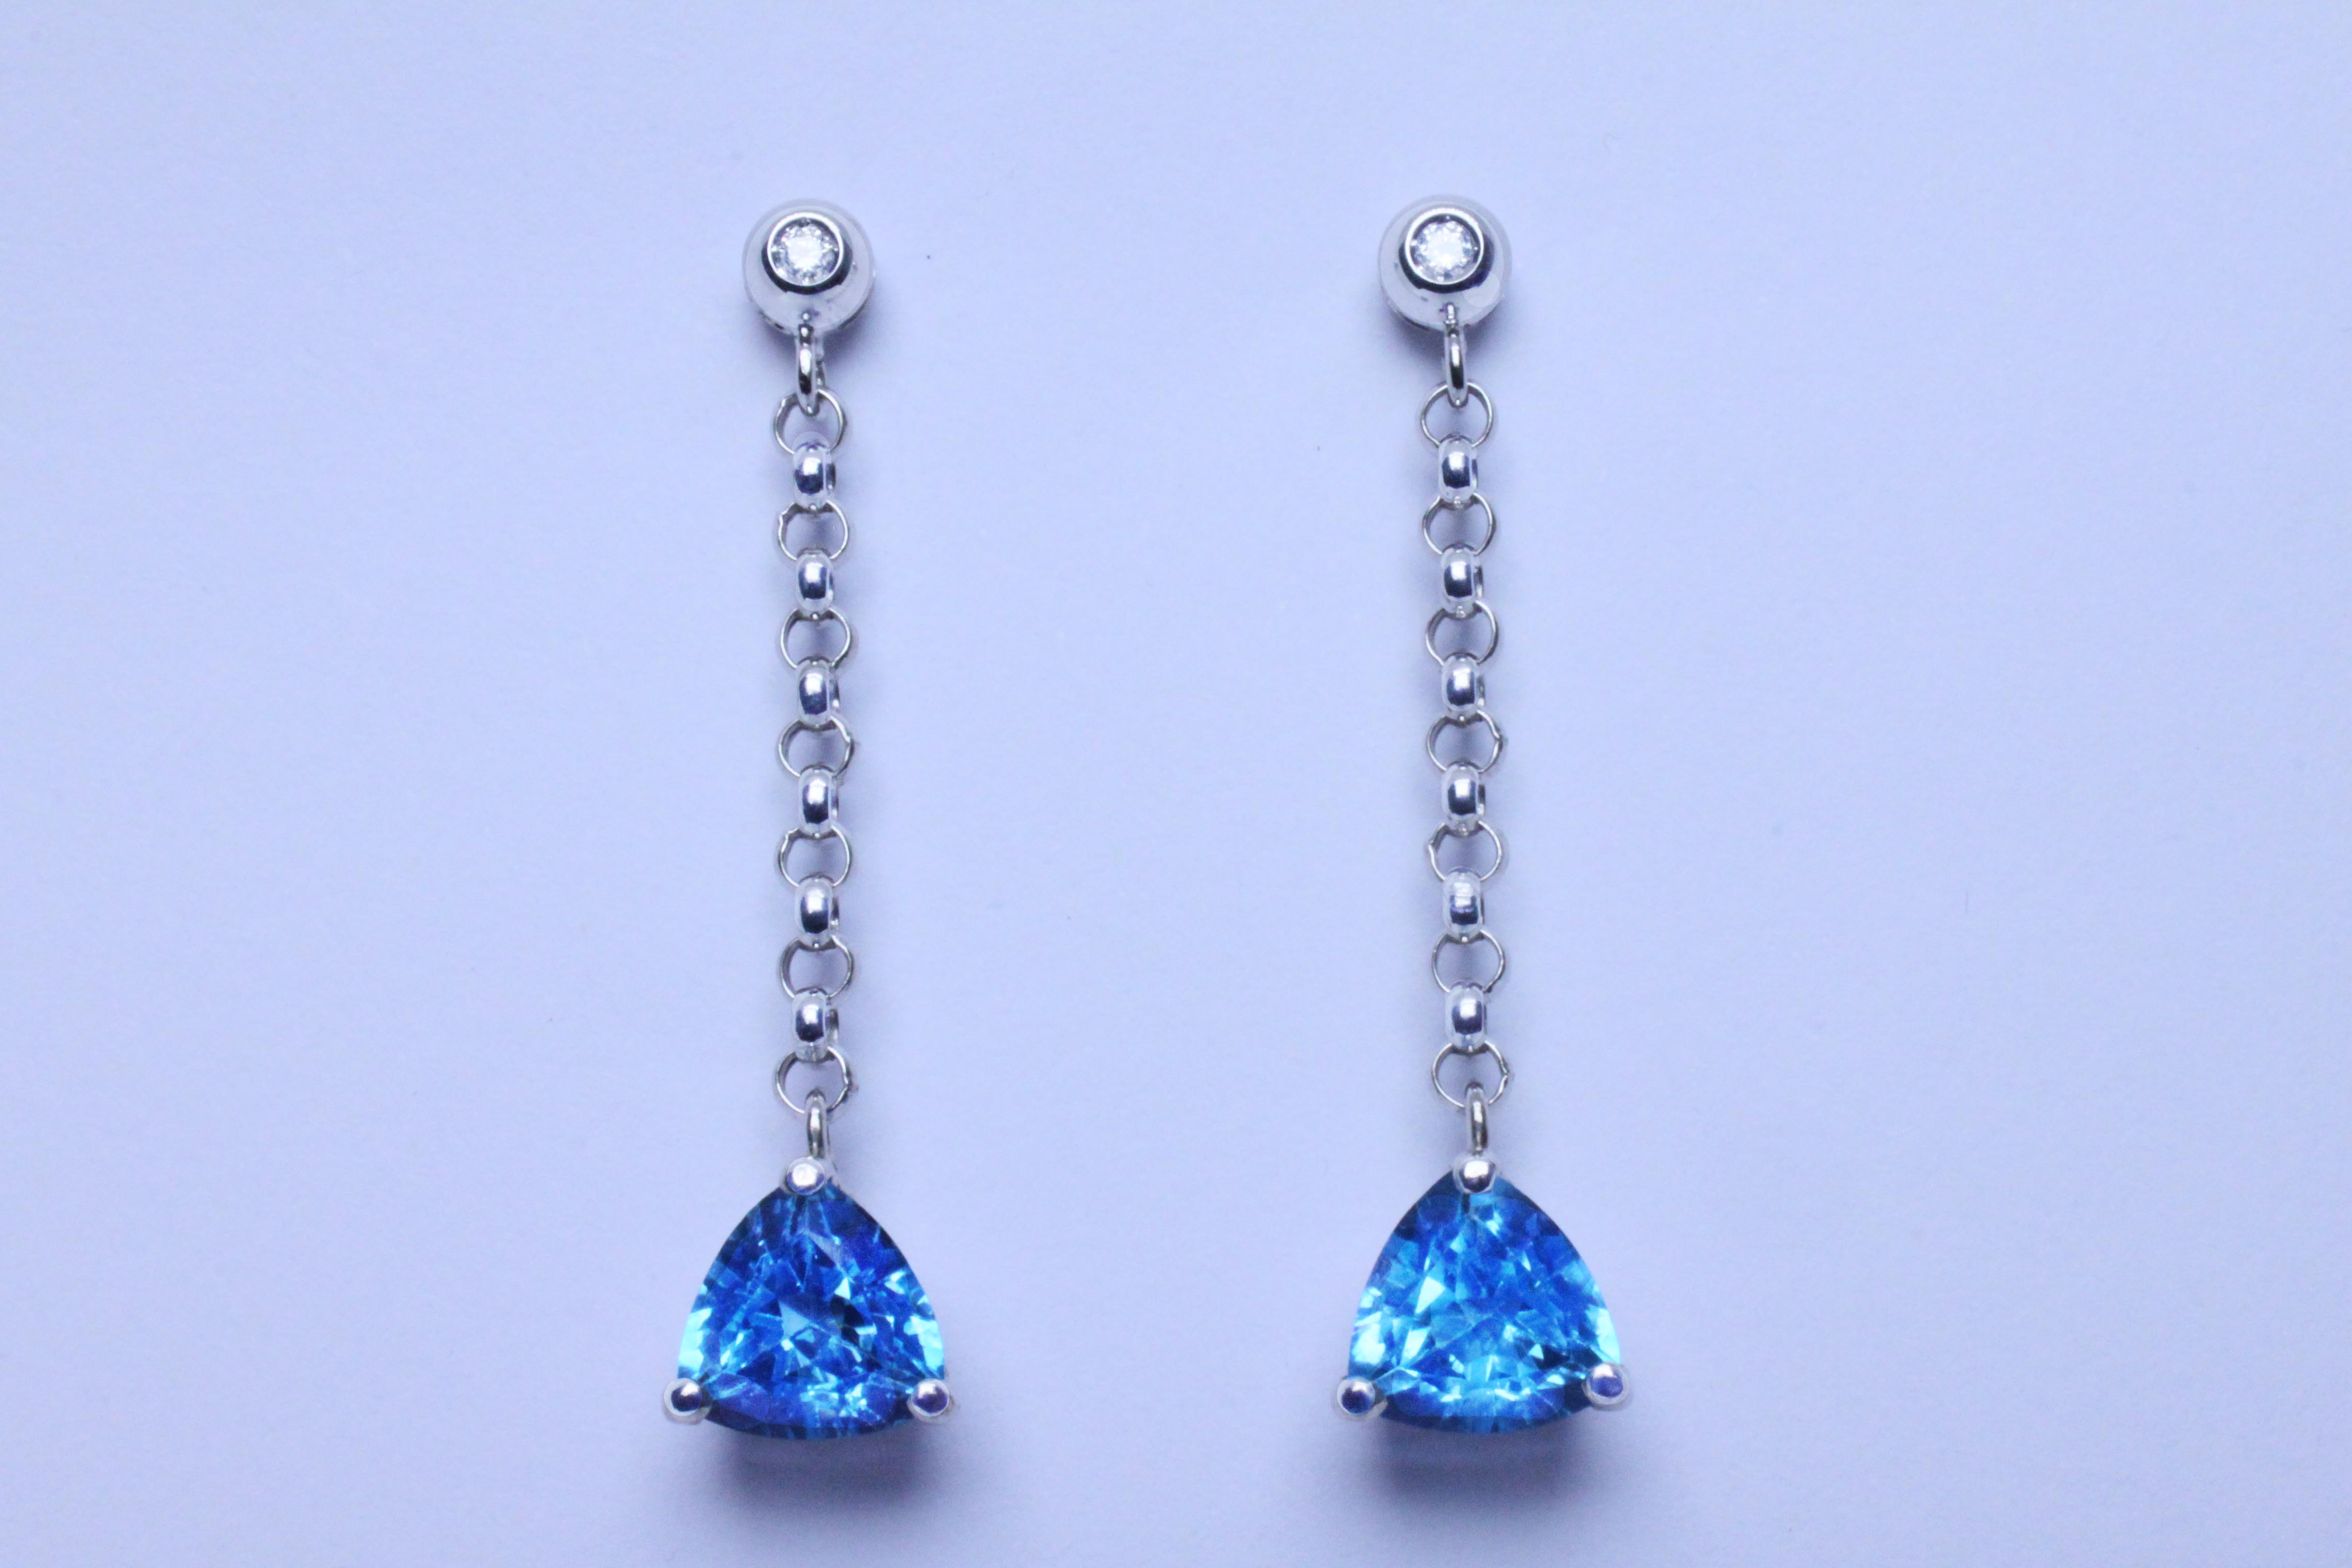 White gold Pendant earrings with diamond and blue topaz